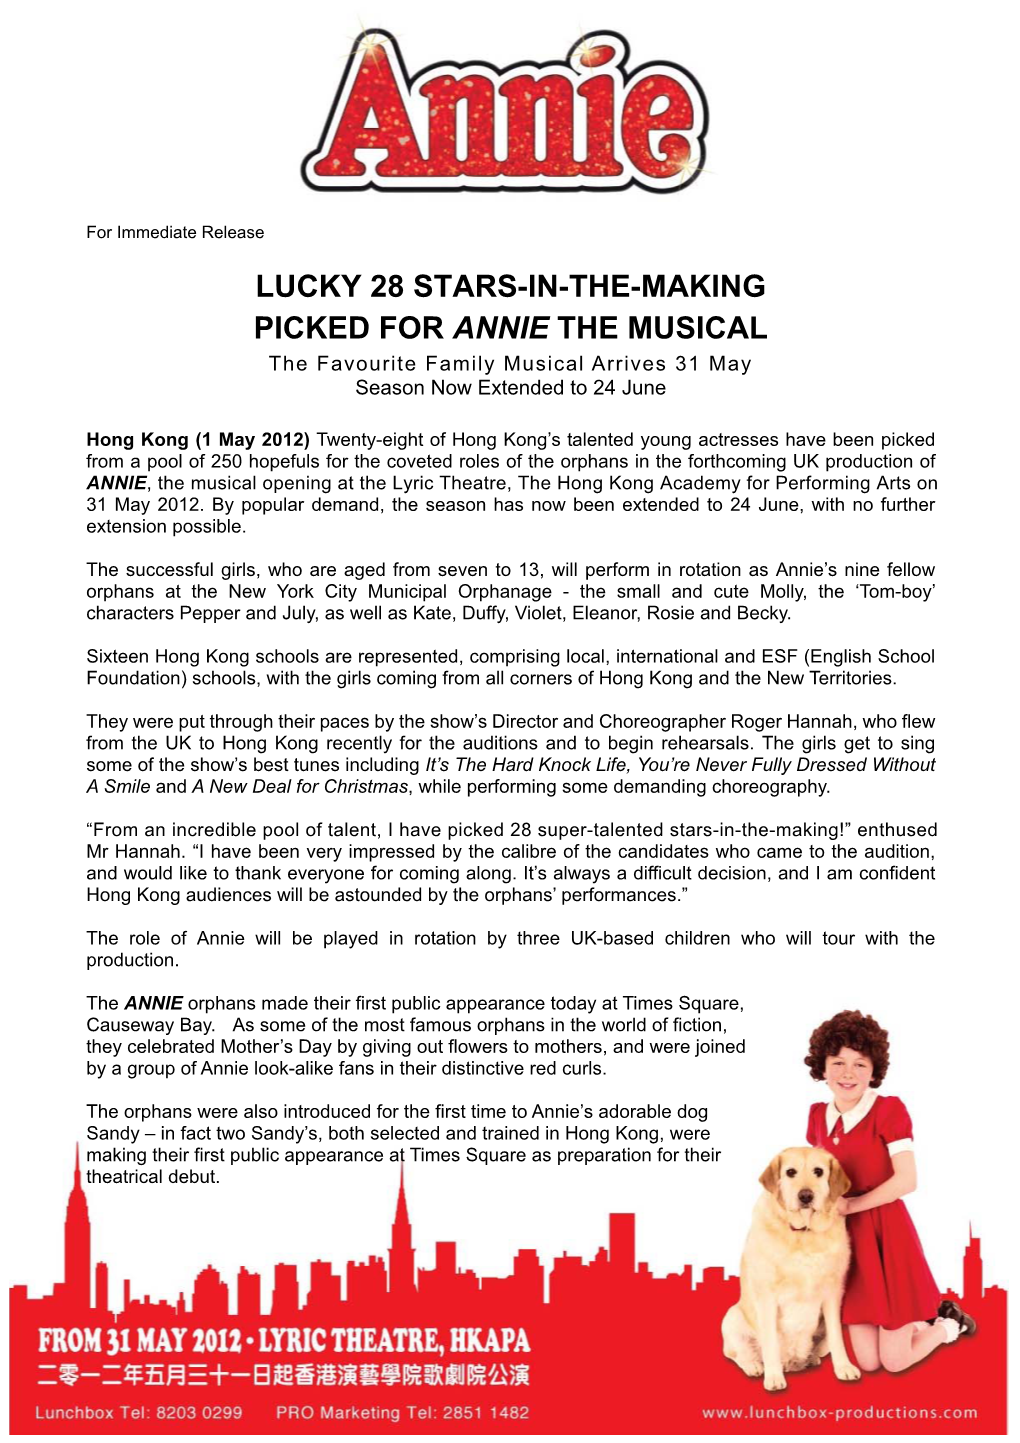 LUCKY 28 STARS-IN-THE-MAKING PICKED for ANNIE the MUSICAL the Favourite Family Musical Arrives 31 May Season Now Extended to 24 June